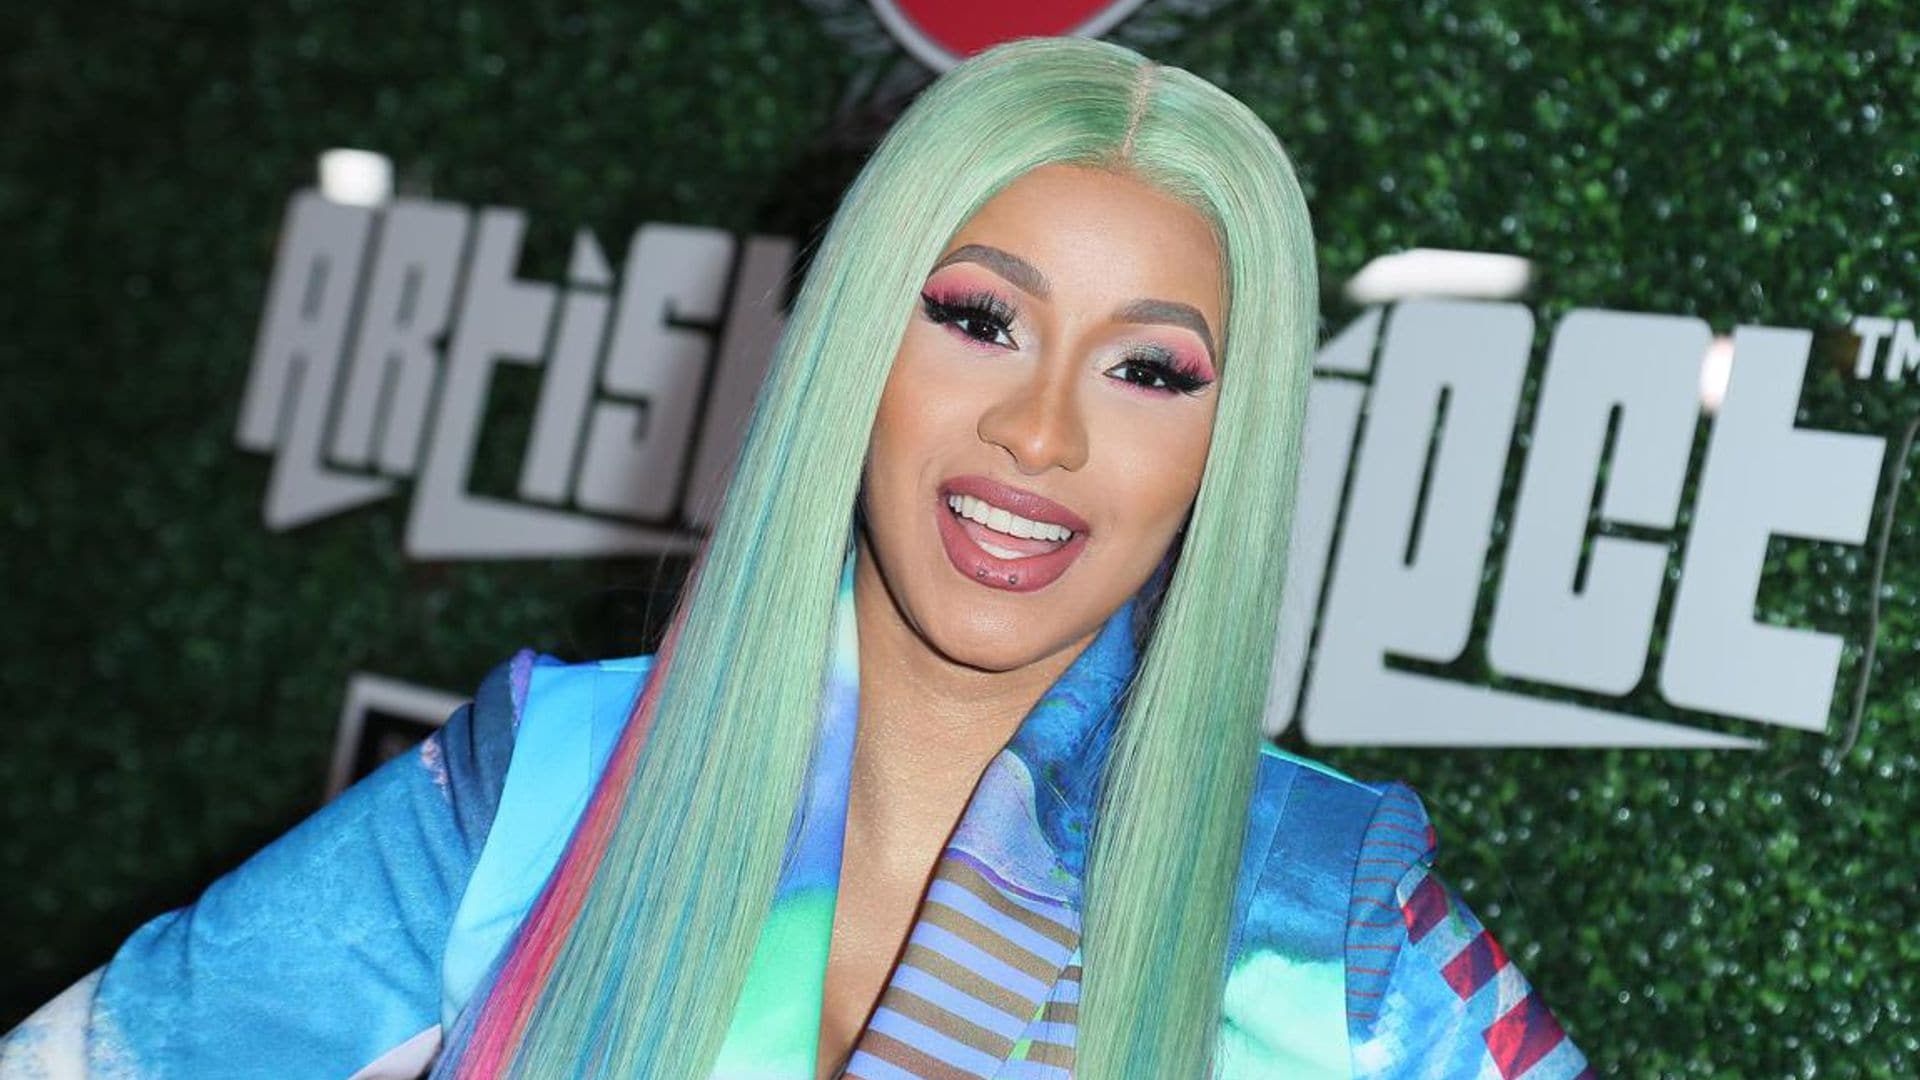 Blue, purple or unicorn hair, here’s the definitive proof that no hair color is off limits for Cardi B